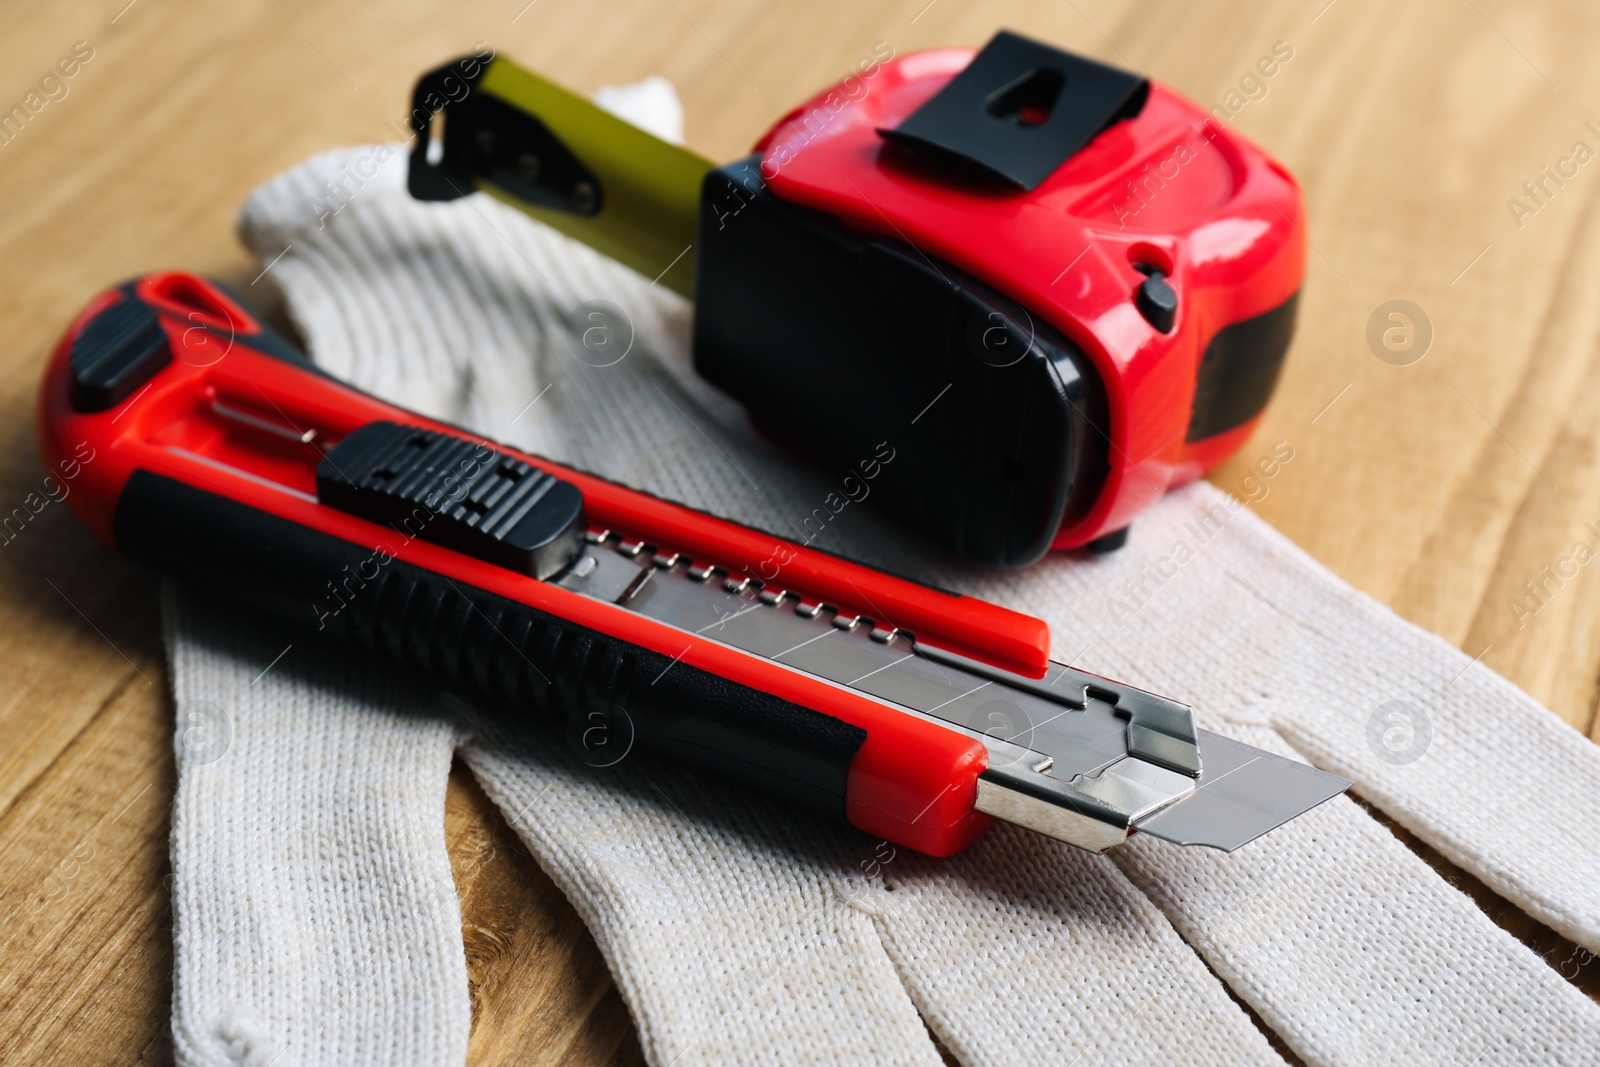 Photo of Utility knife, measuring tape and glove on wooden table, closeup